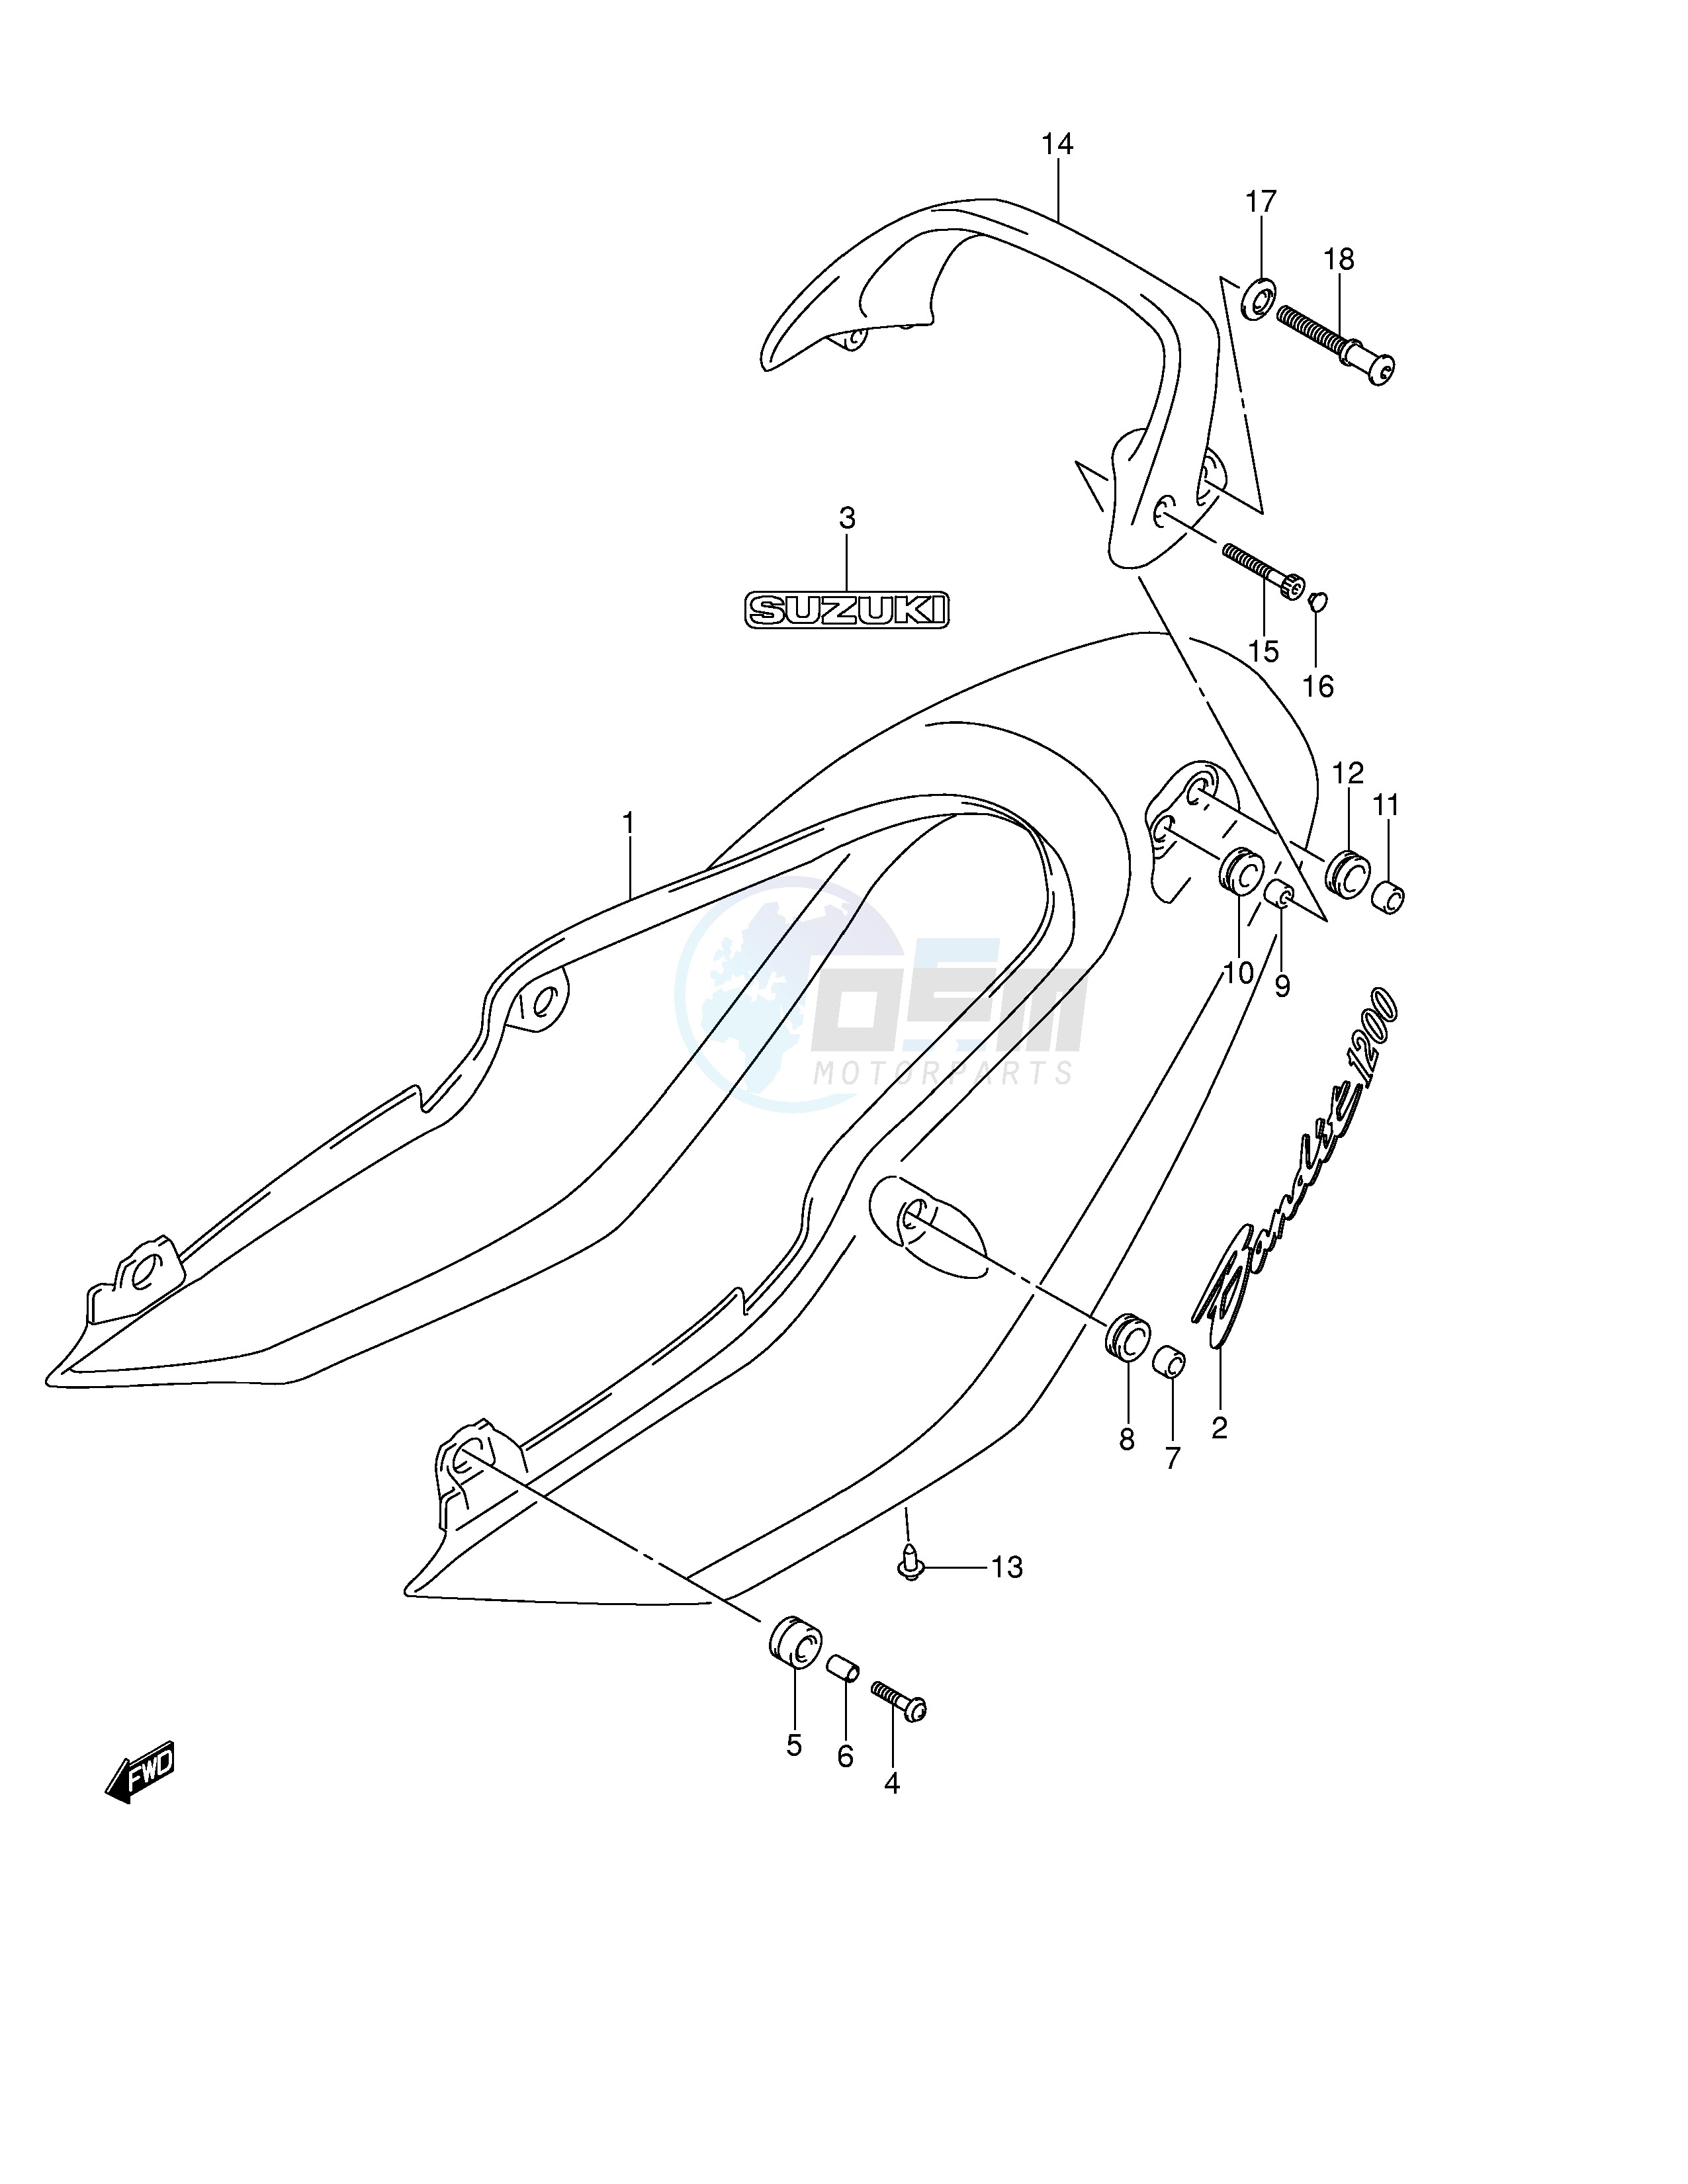 SEAT TAIL COVER (GSF1200K4) blueprint